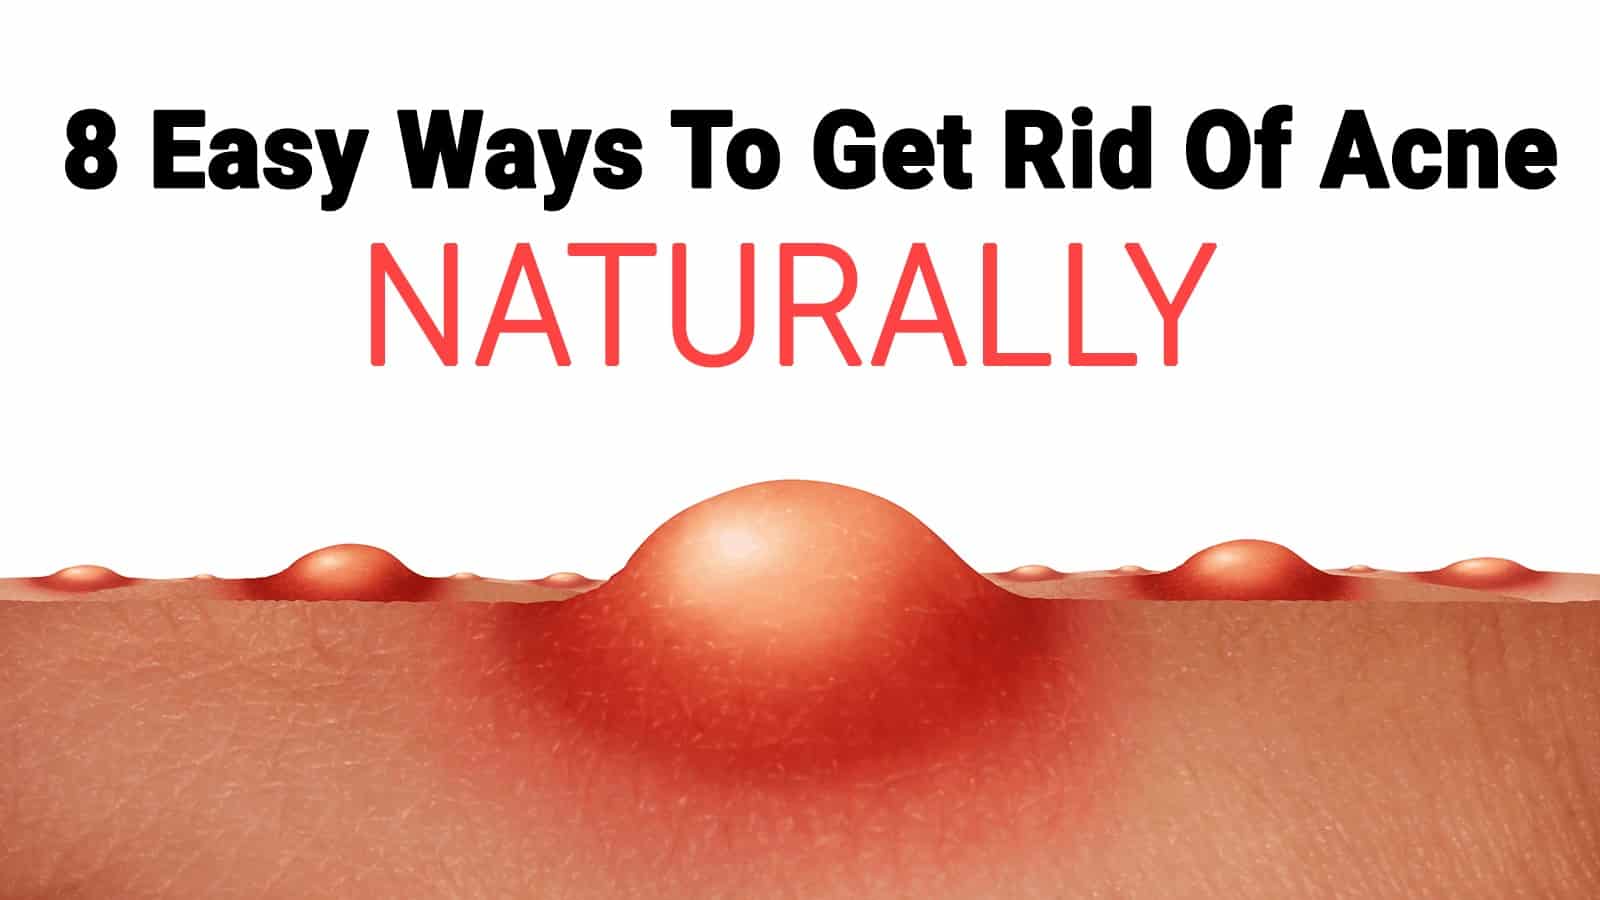 8 Easy Ways To Get Rid Of Acne Naturally